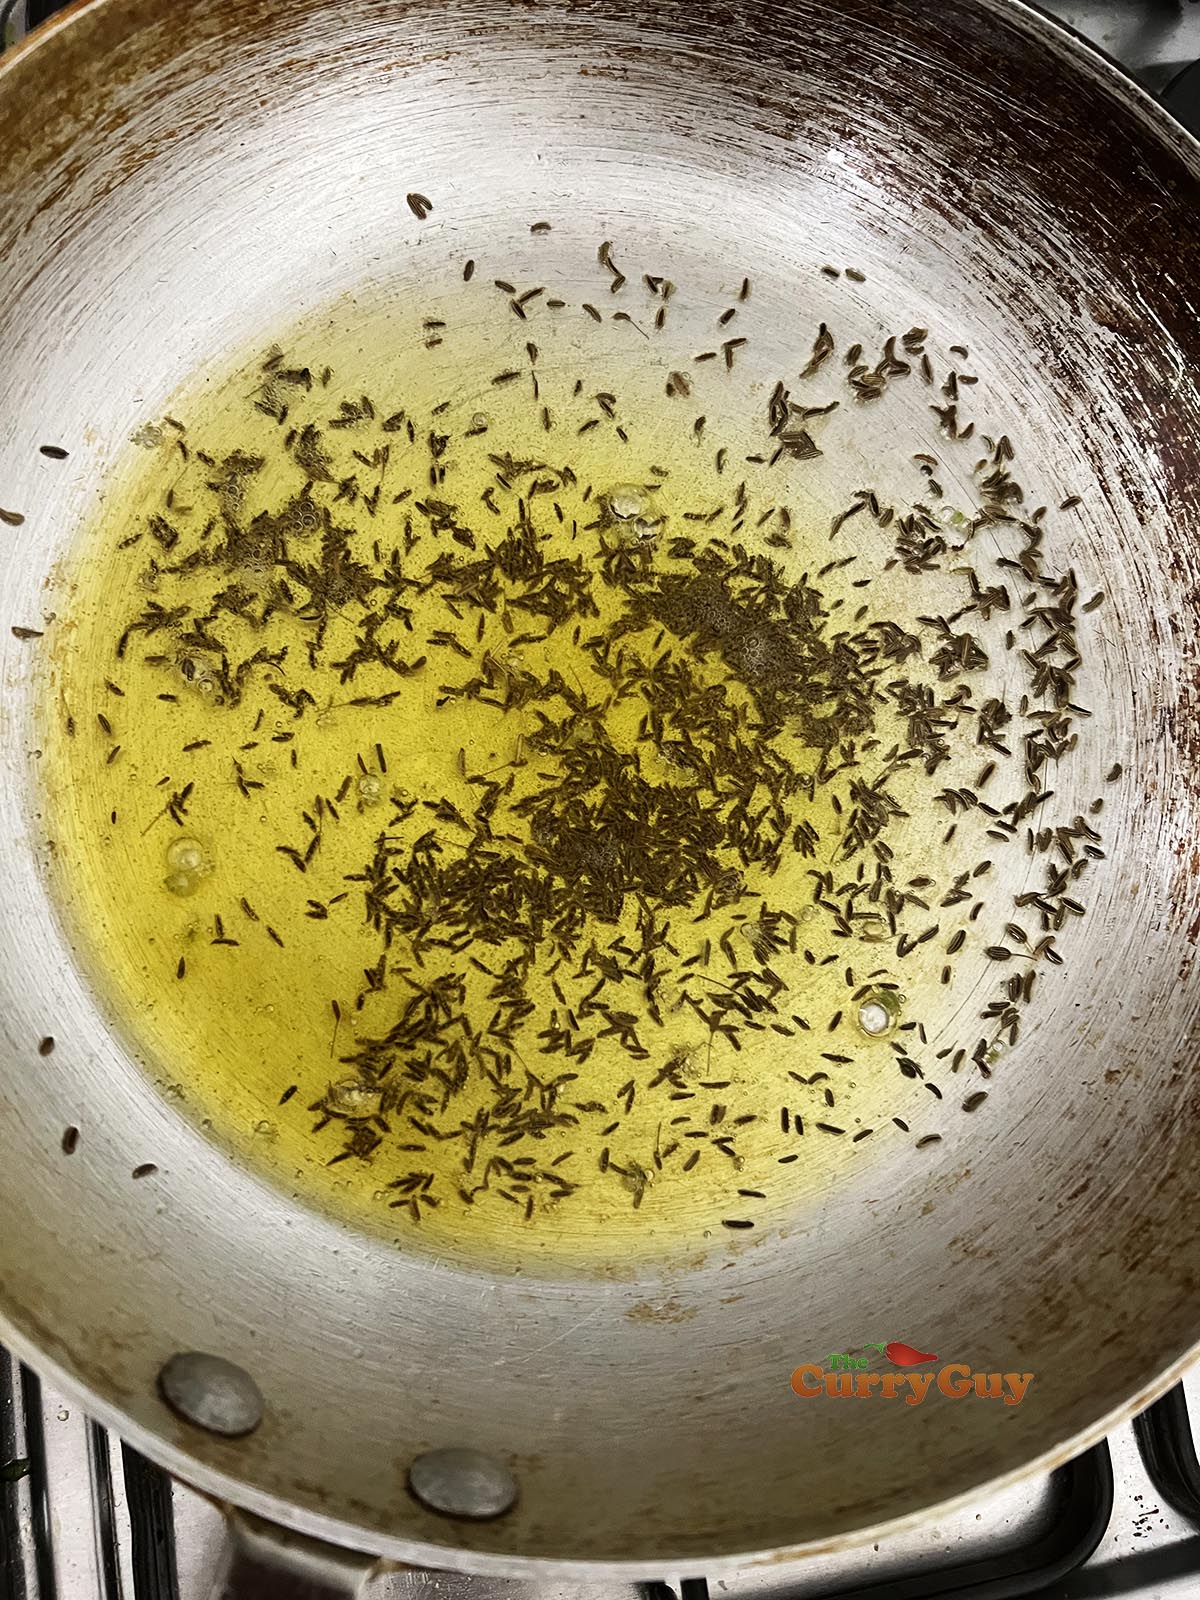 Infusing black cumin seeds into the ghee